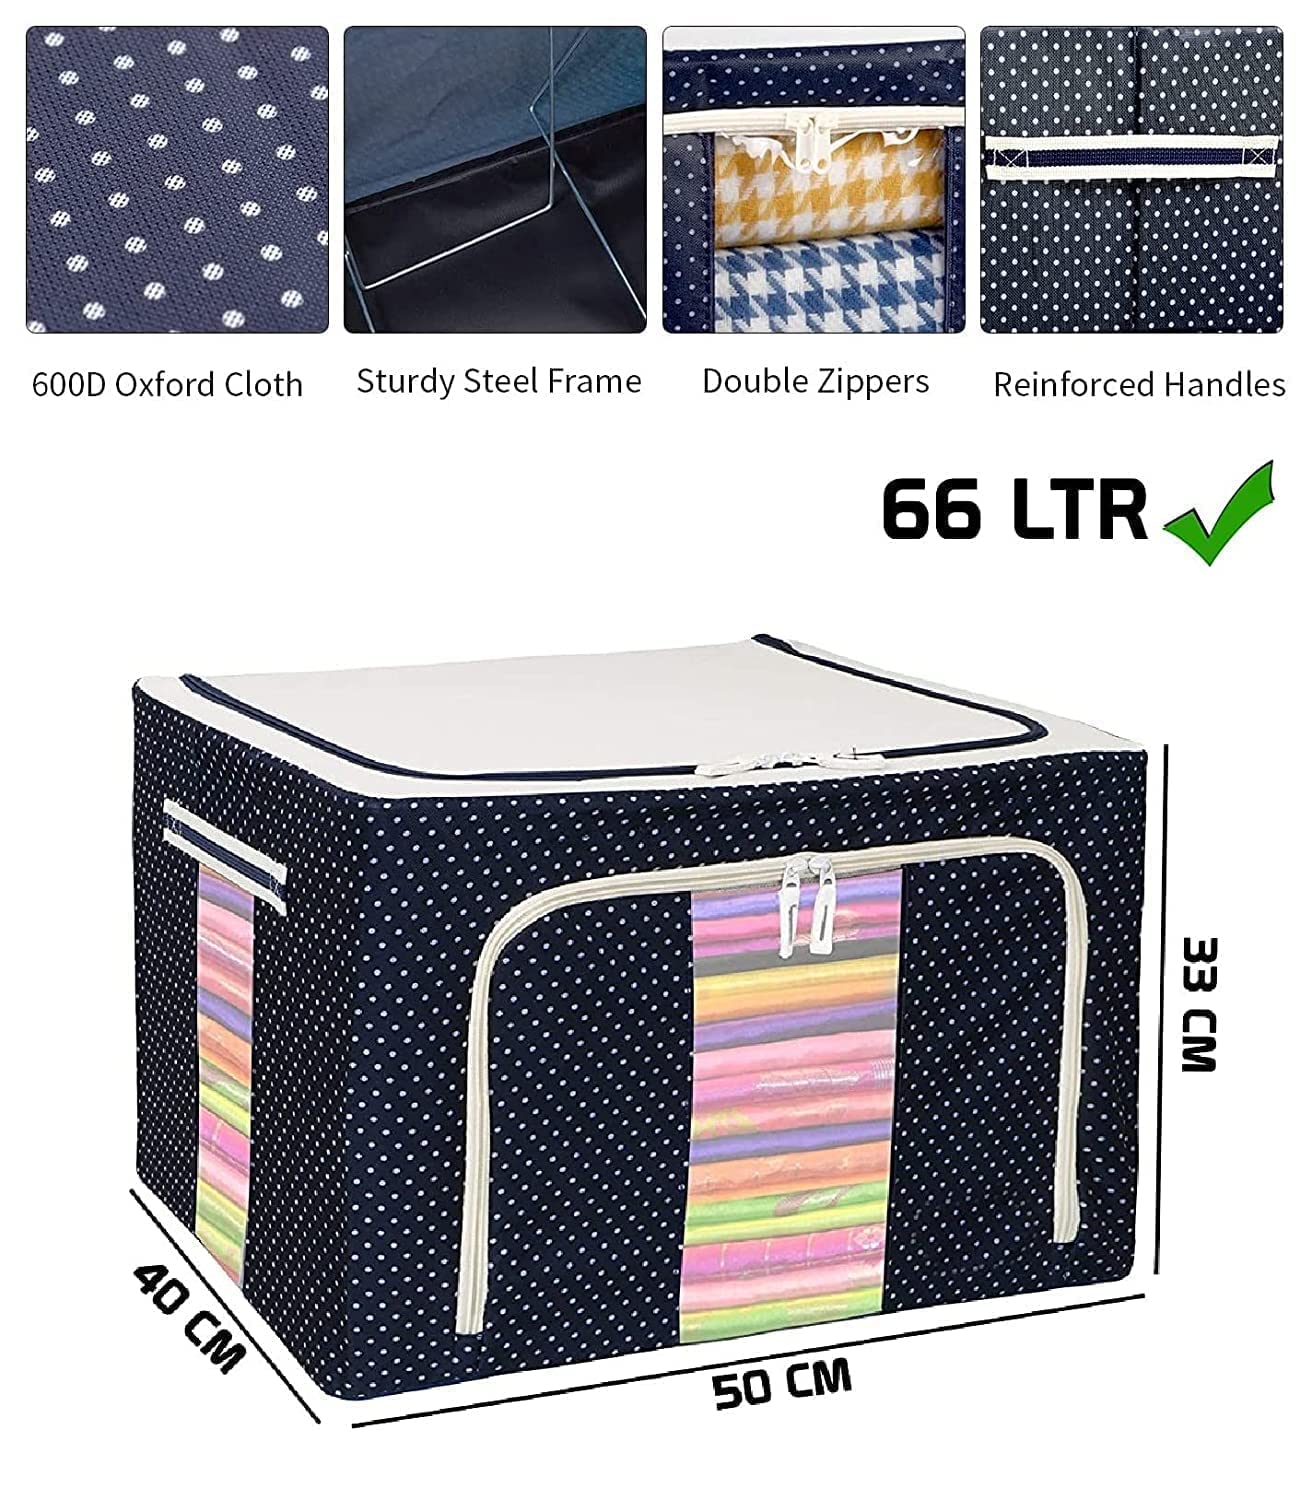 Clothes Storage Box Foldable Steel Frame Clothes Organizer Storage Box for Wardrobe, Saree, Shirts, and Blankets (oxford fabric) (66 LTR Pack Of 2))